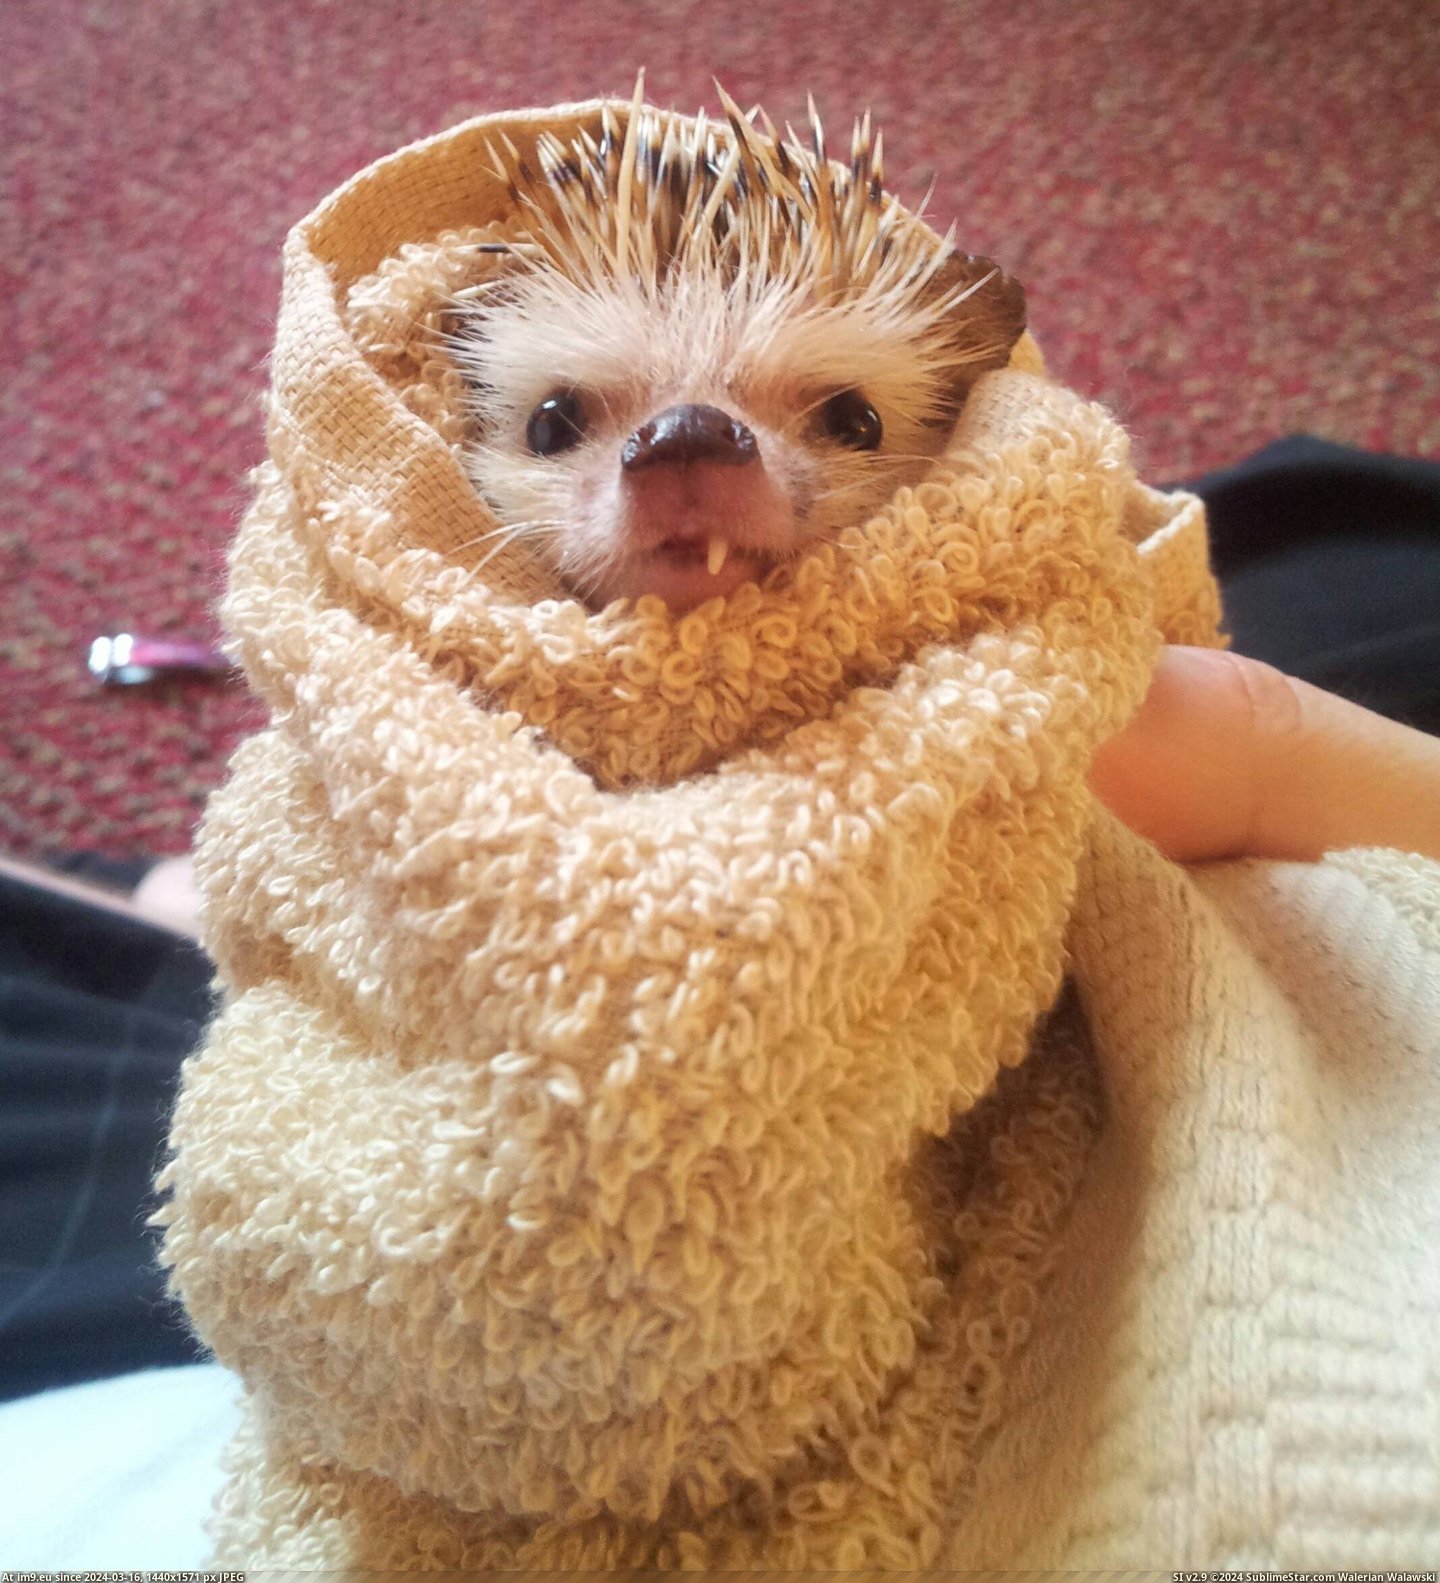 #One #Night #People #Hedgehog #Scraggly #Toothed #Lot #Bath #Enjoyed [Aww] Since a lot of people enjoyed the scraggly one toothed hedgehog here he is after his bath last night. Pic. (Bild von album My r/AWW favs))